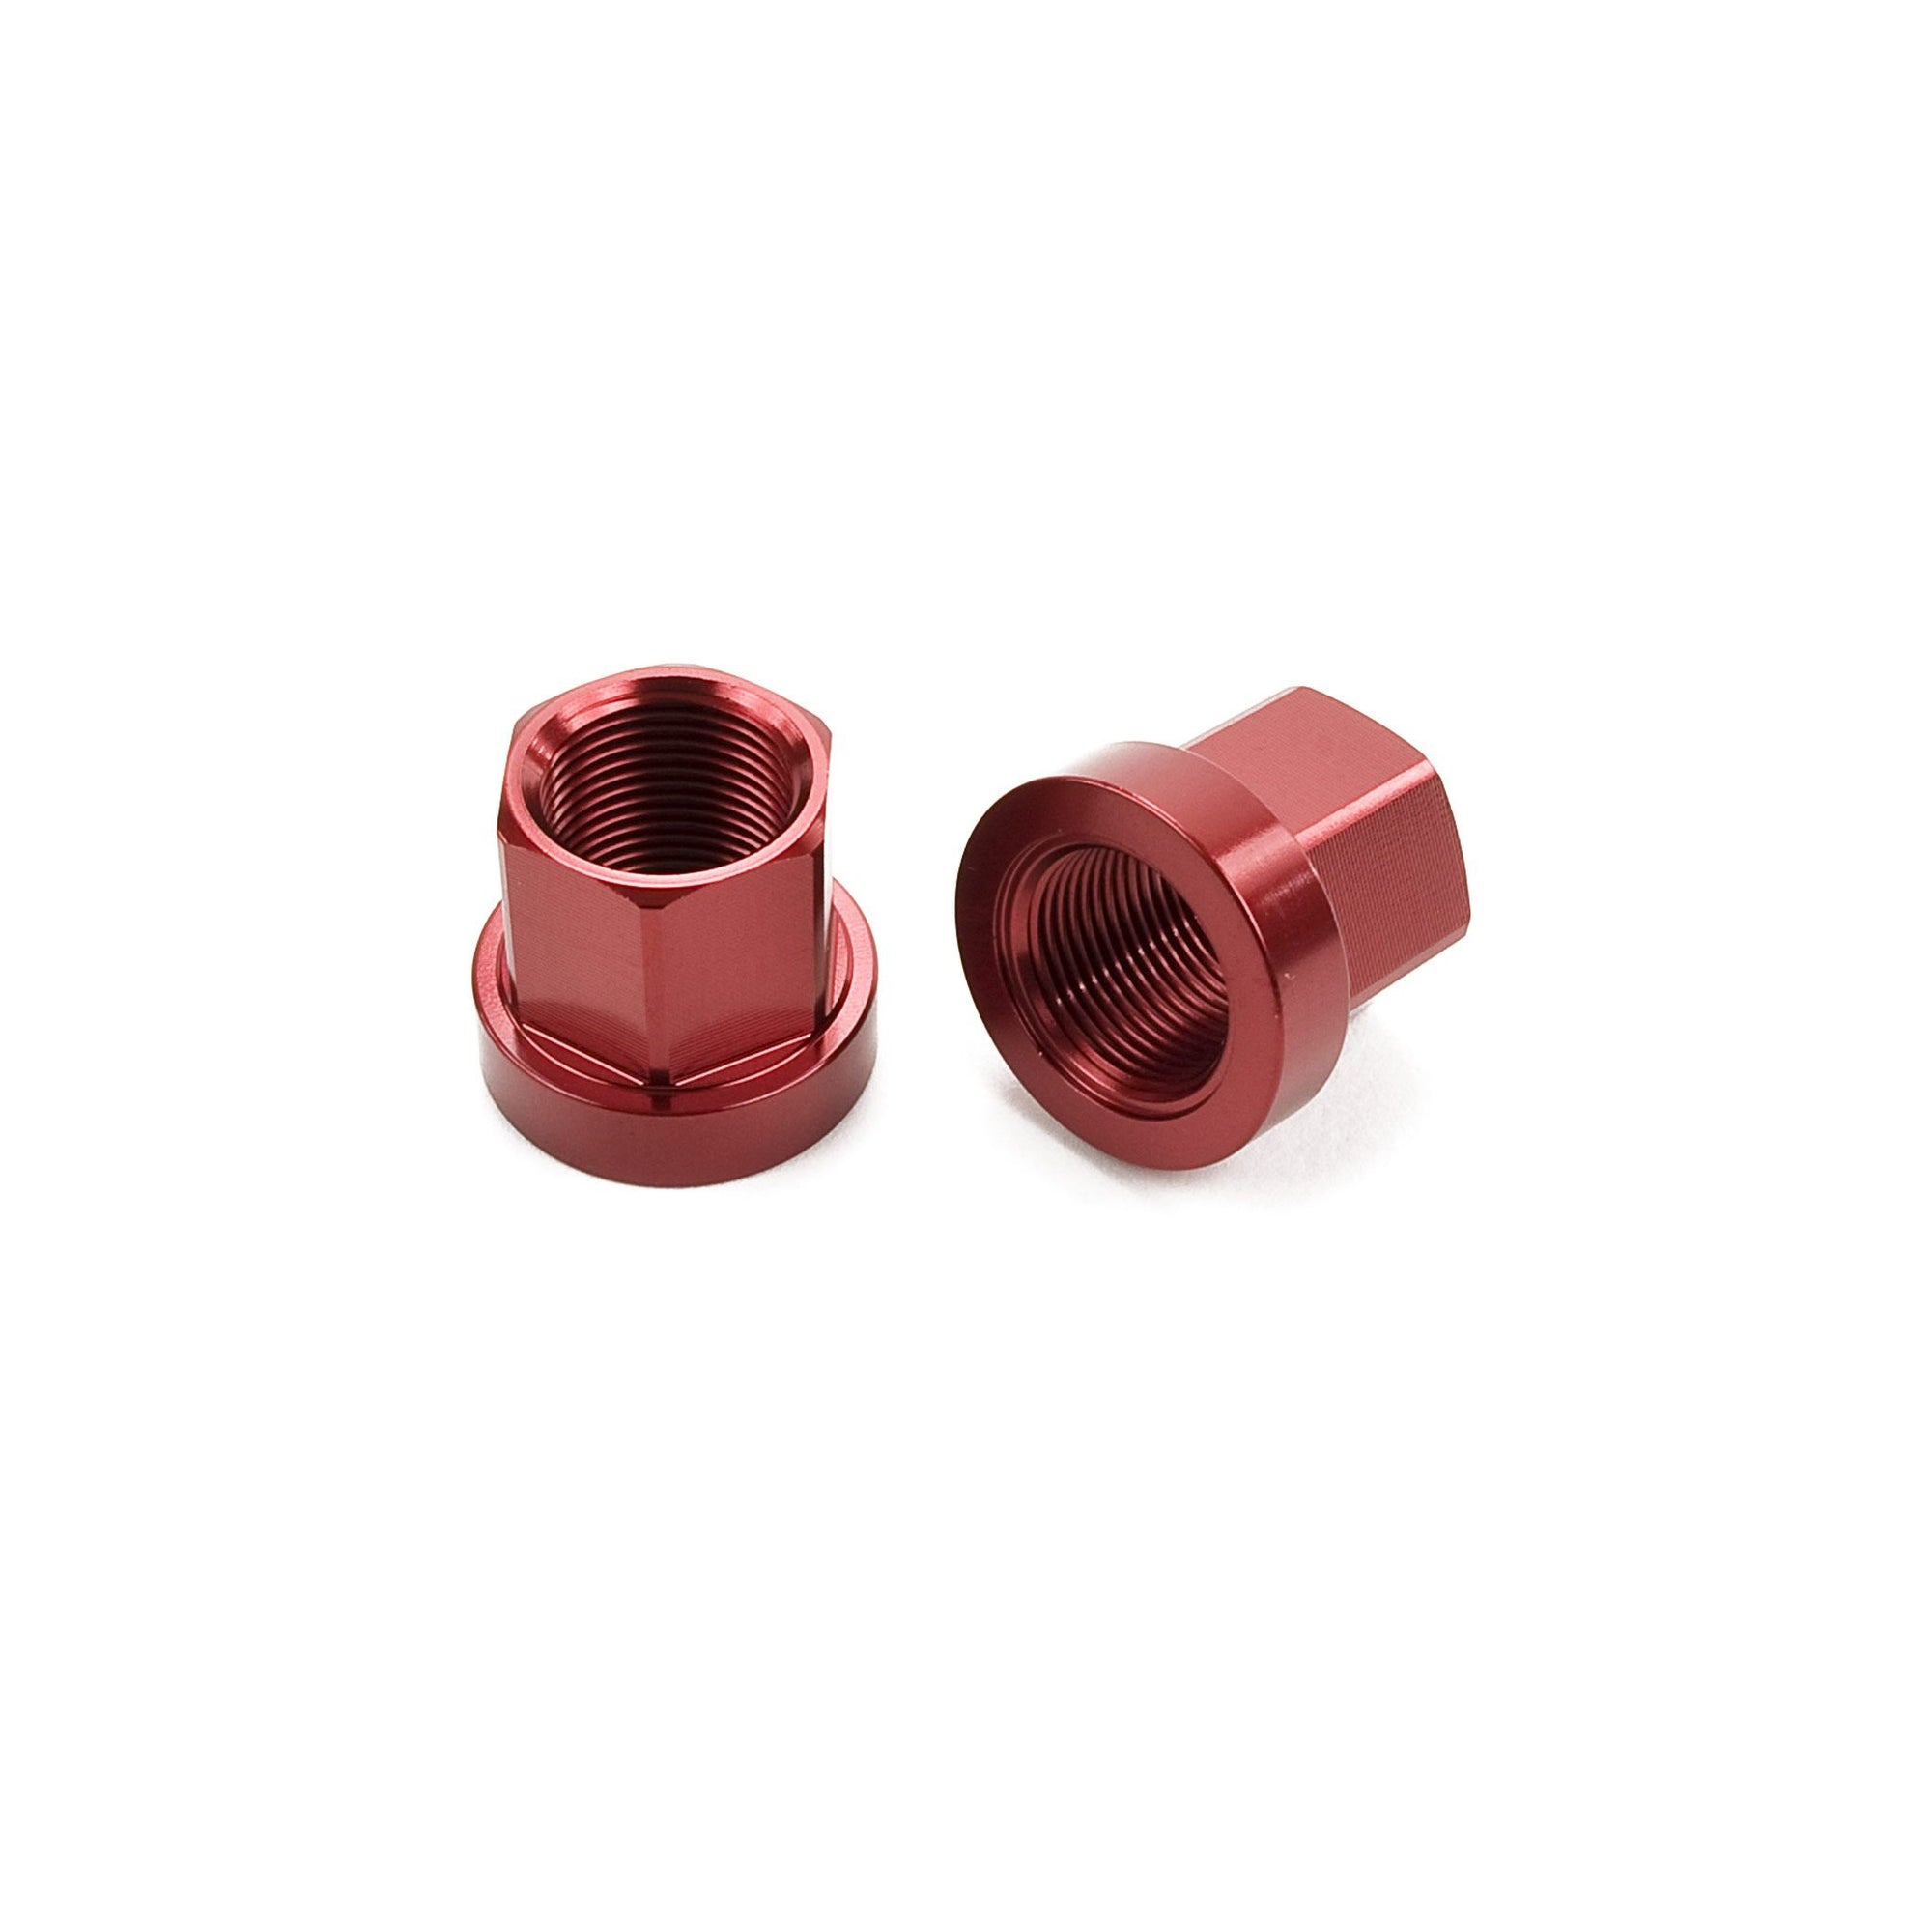 Mission 3/8" x 26t Aluminum Axle Nuts -  Set of 2 - Red